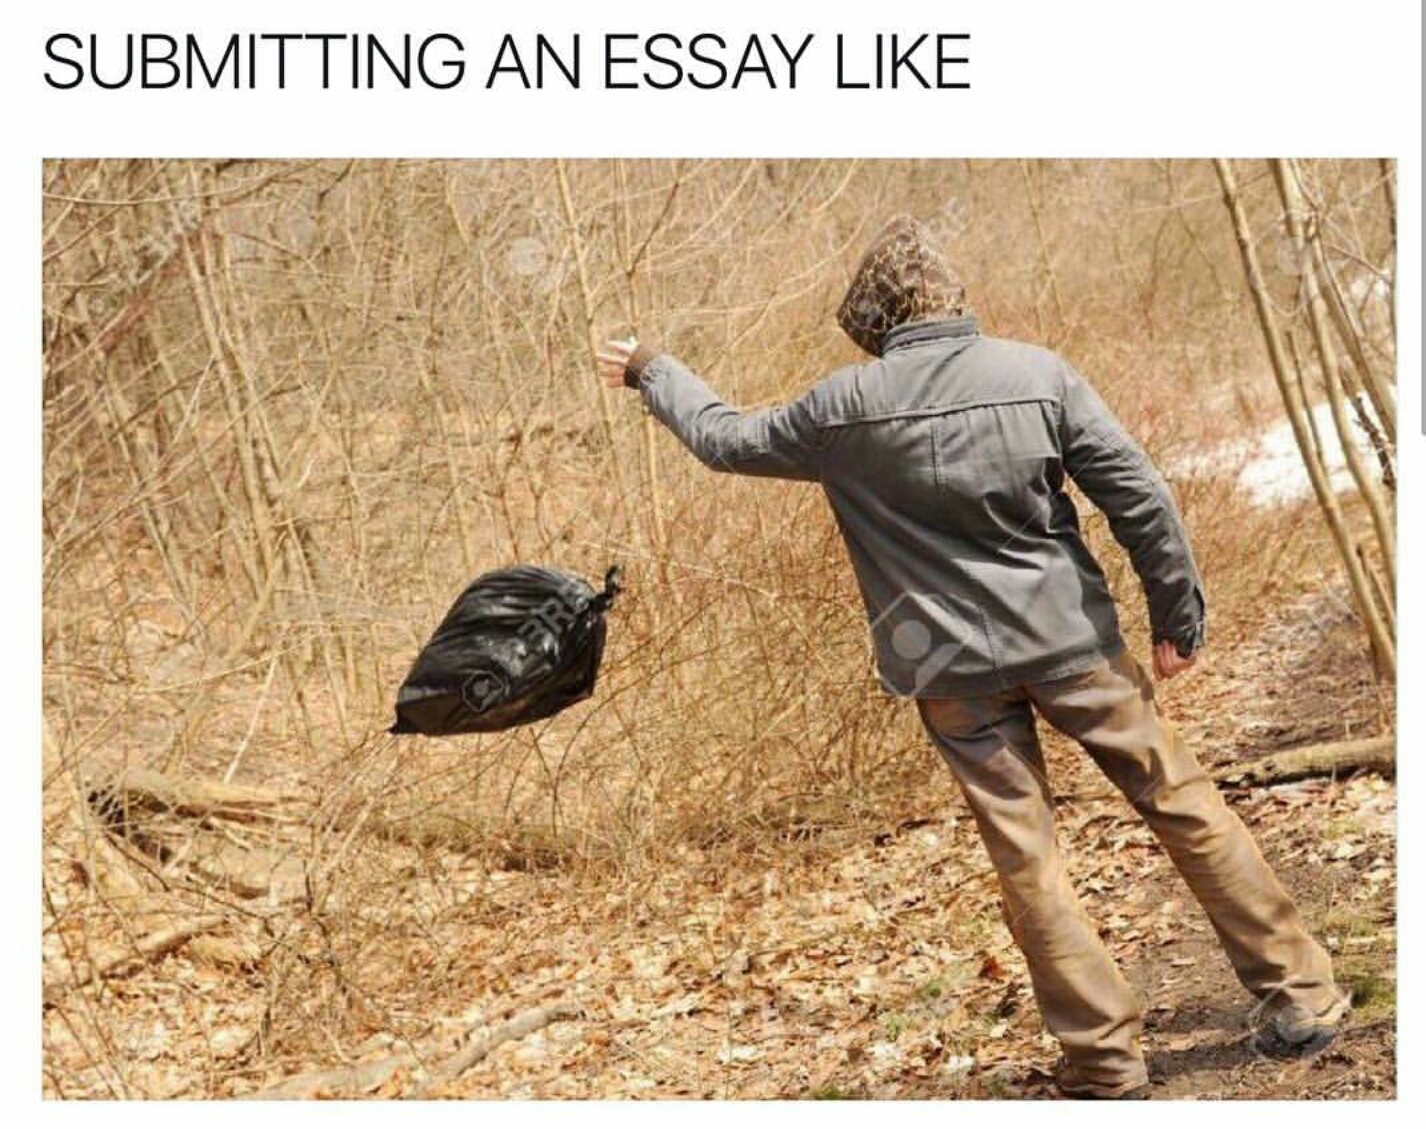 submitting essay meme - Submitting An Essay